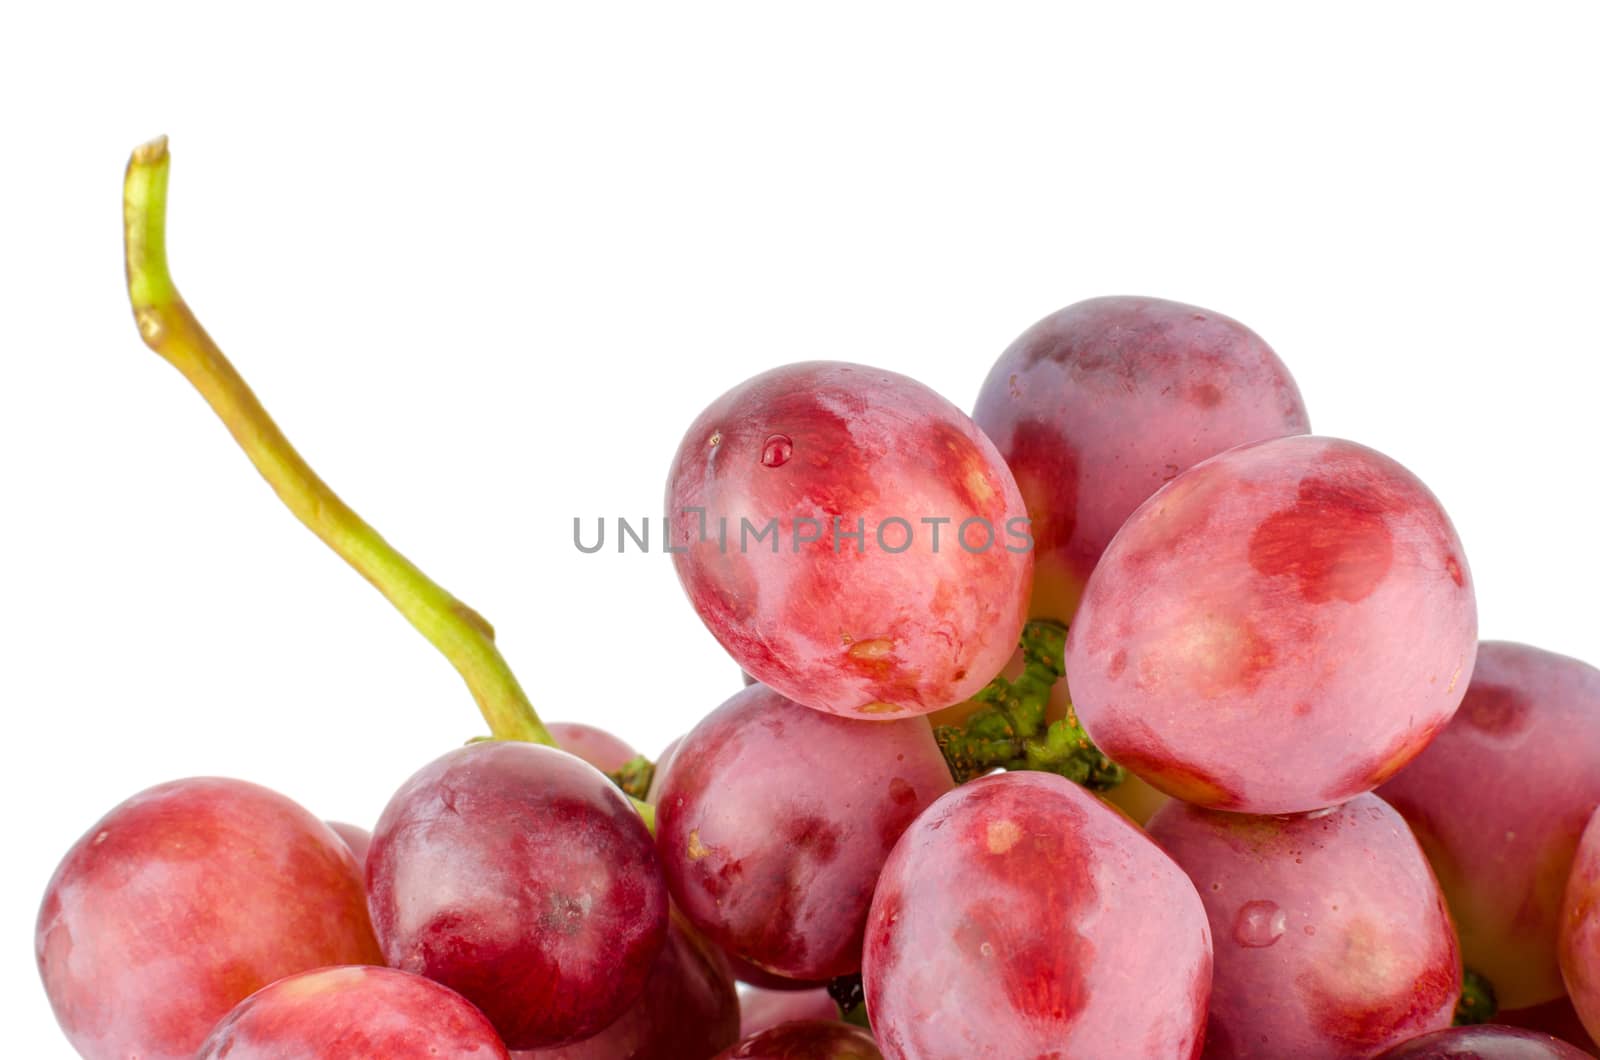 Red grape isolated on white background